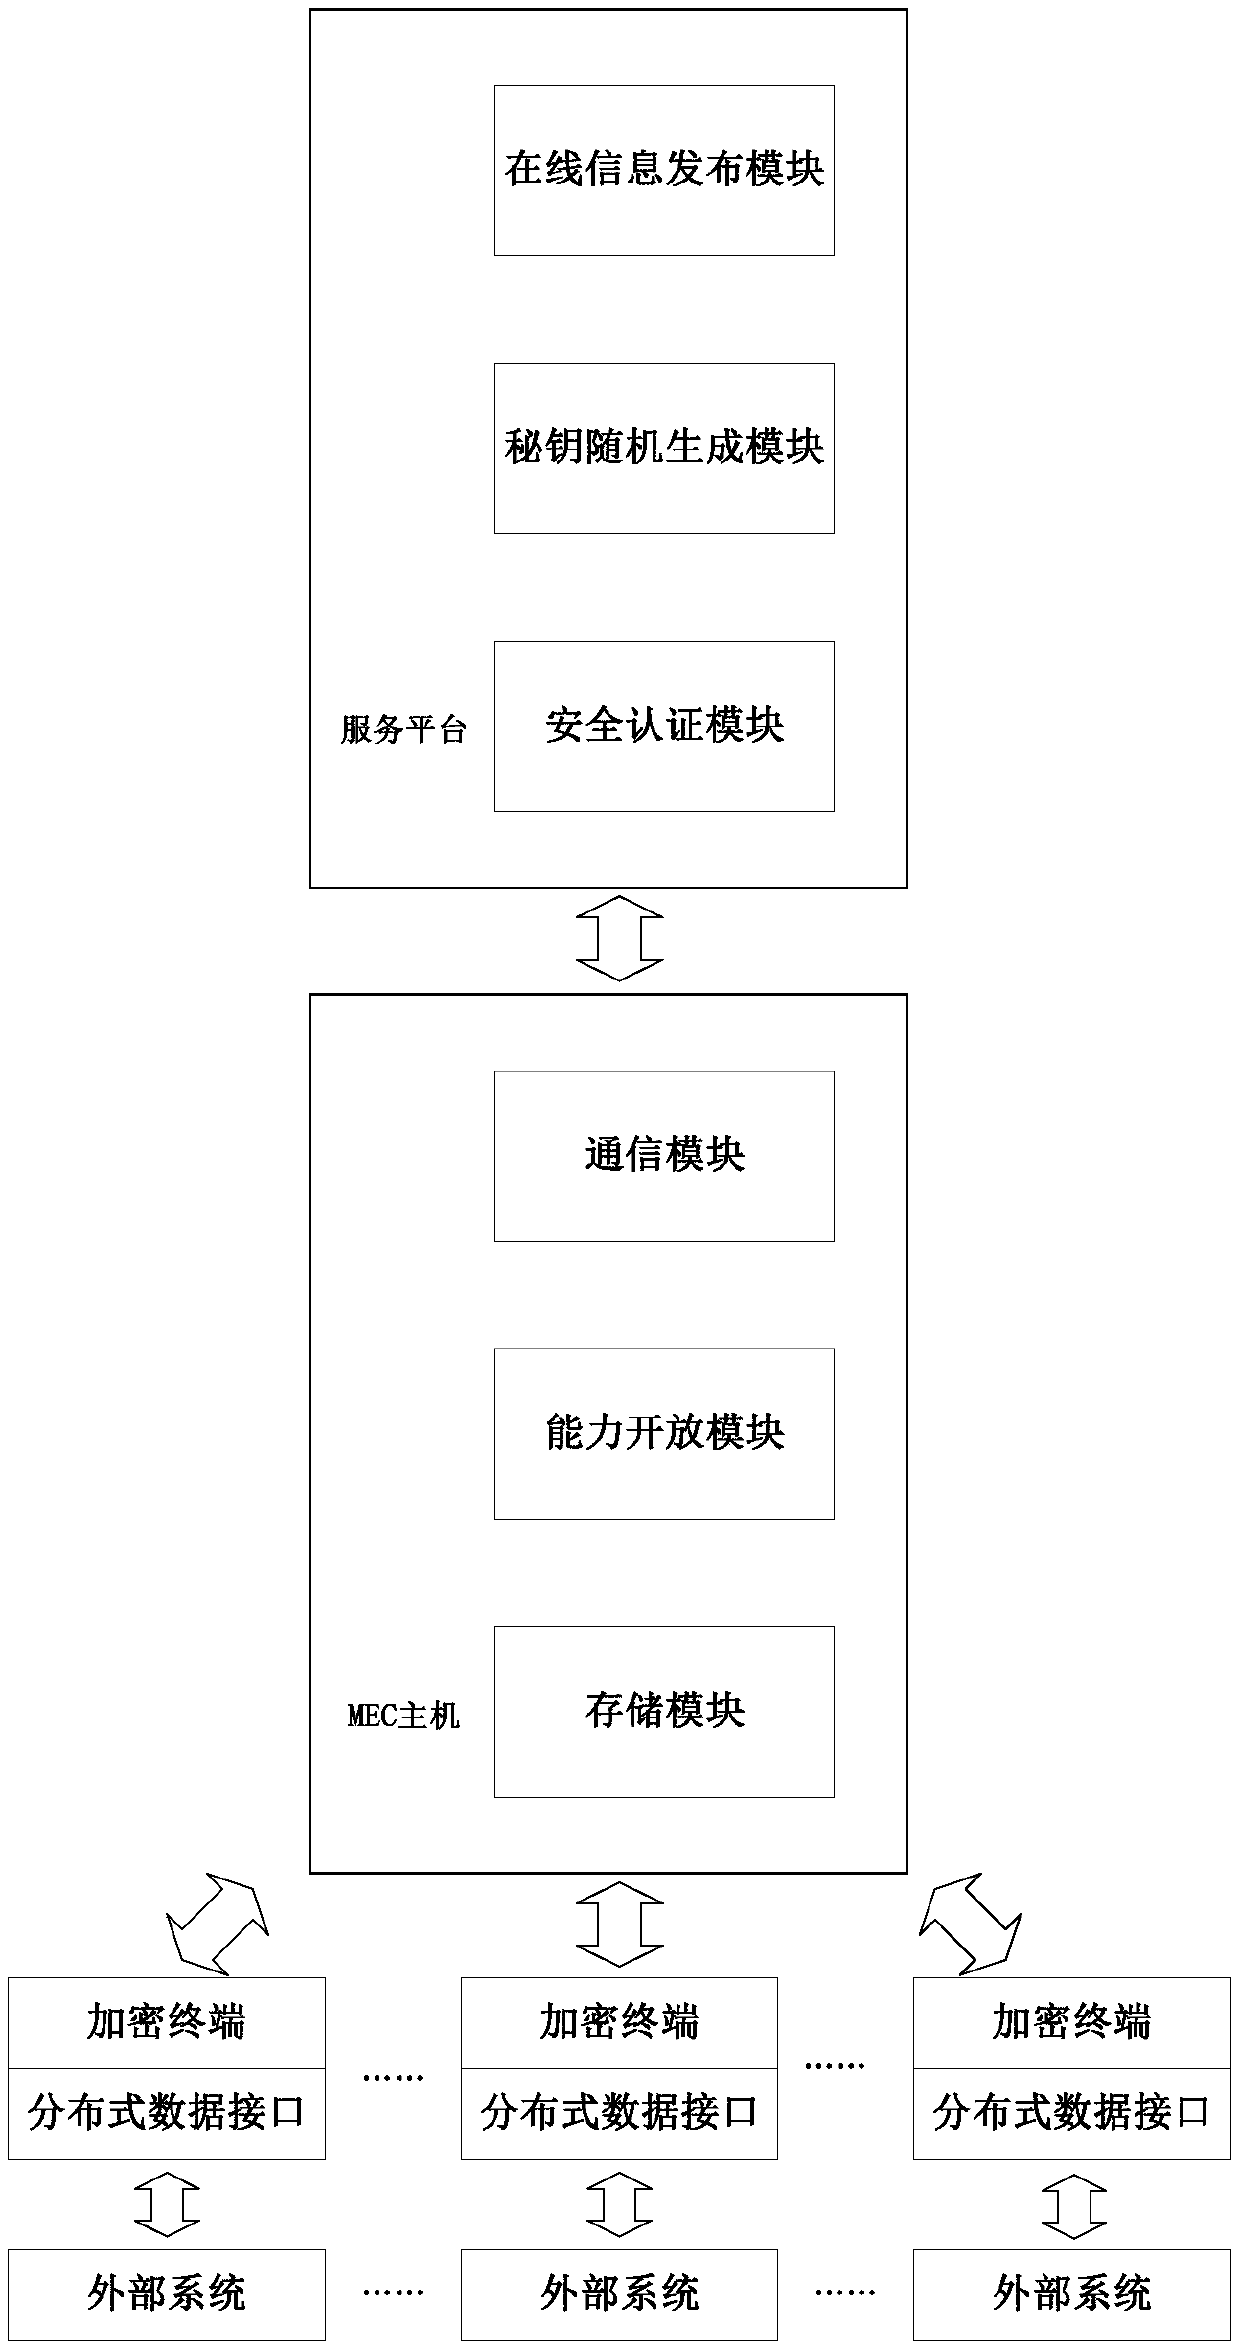 second-hand house transaction system and method based on 5G architecture and a block chain